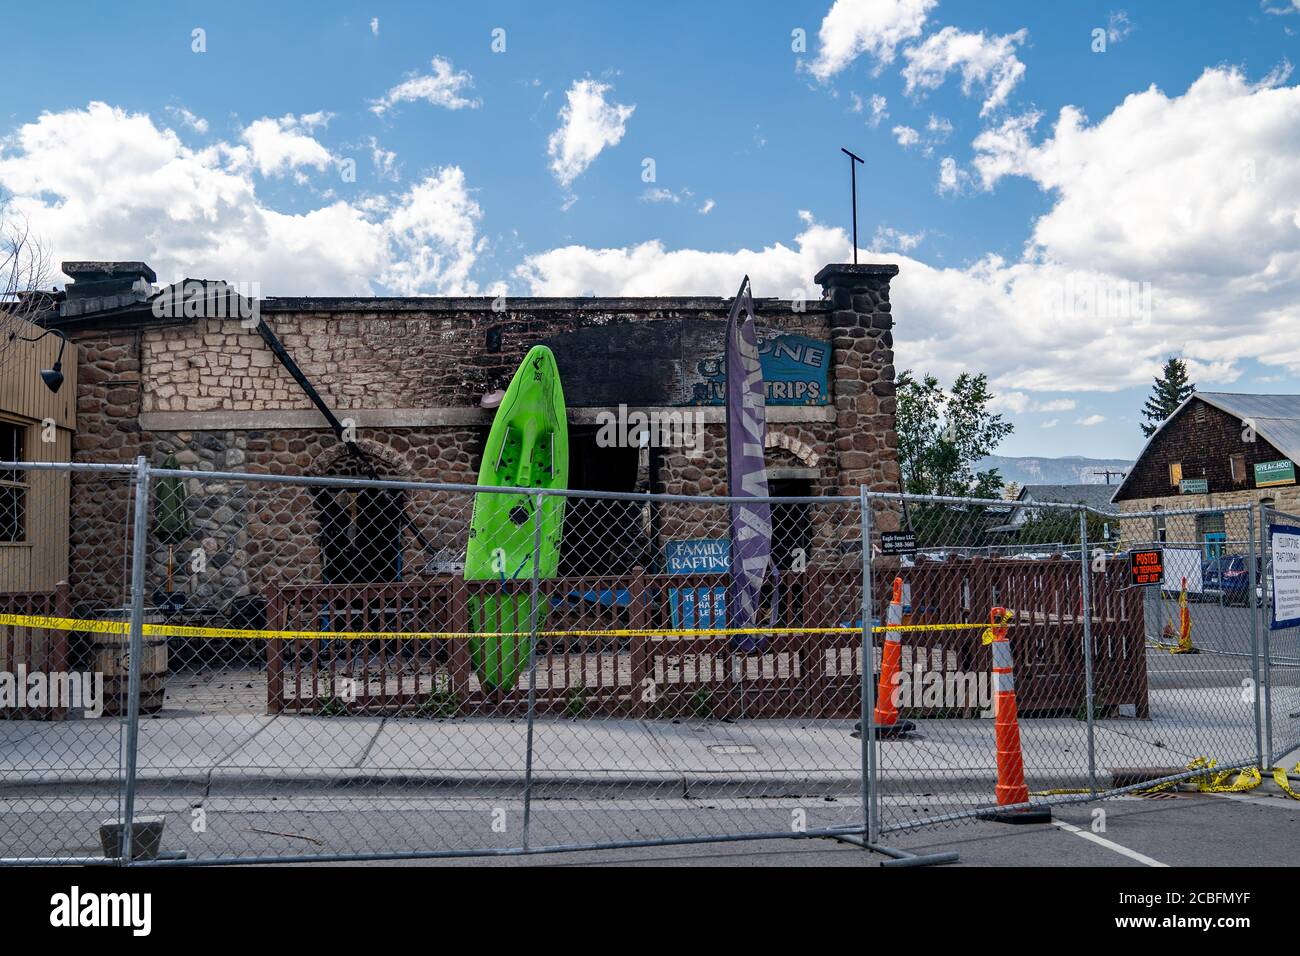 Gardiner, Montana - August 7, 2020: The remains of the destroyed Yellowstone Rafting Company, damanged by a fire that burned several businesses in the Stock Photo